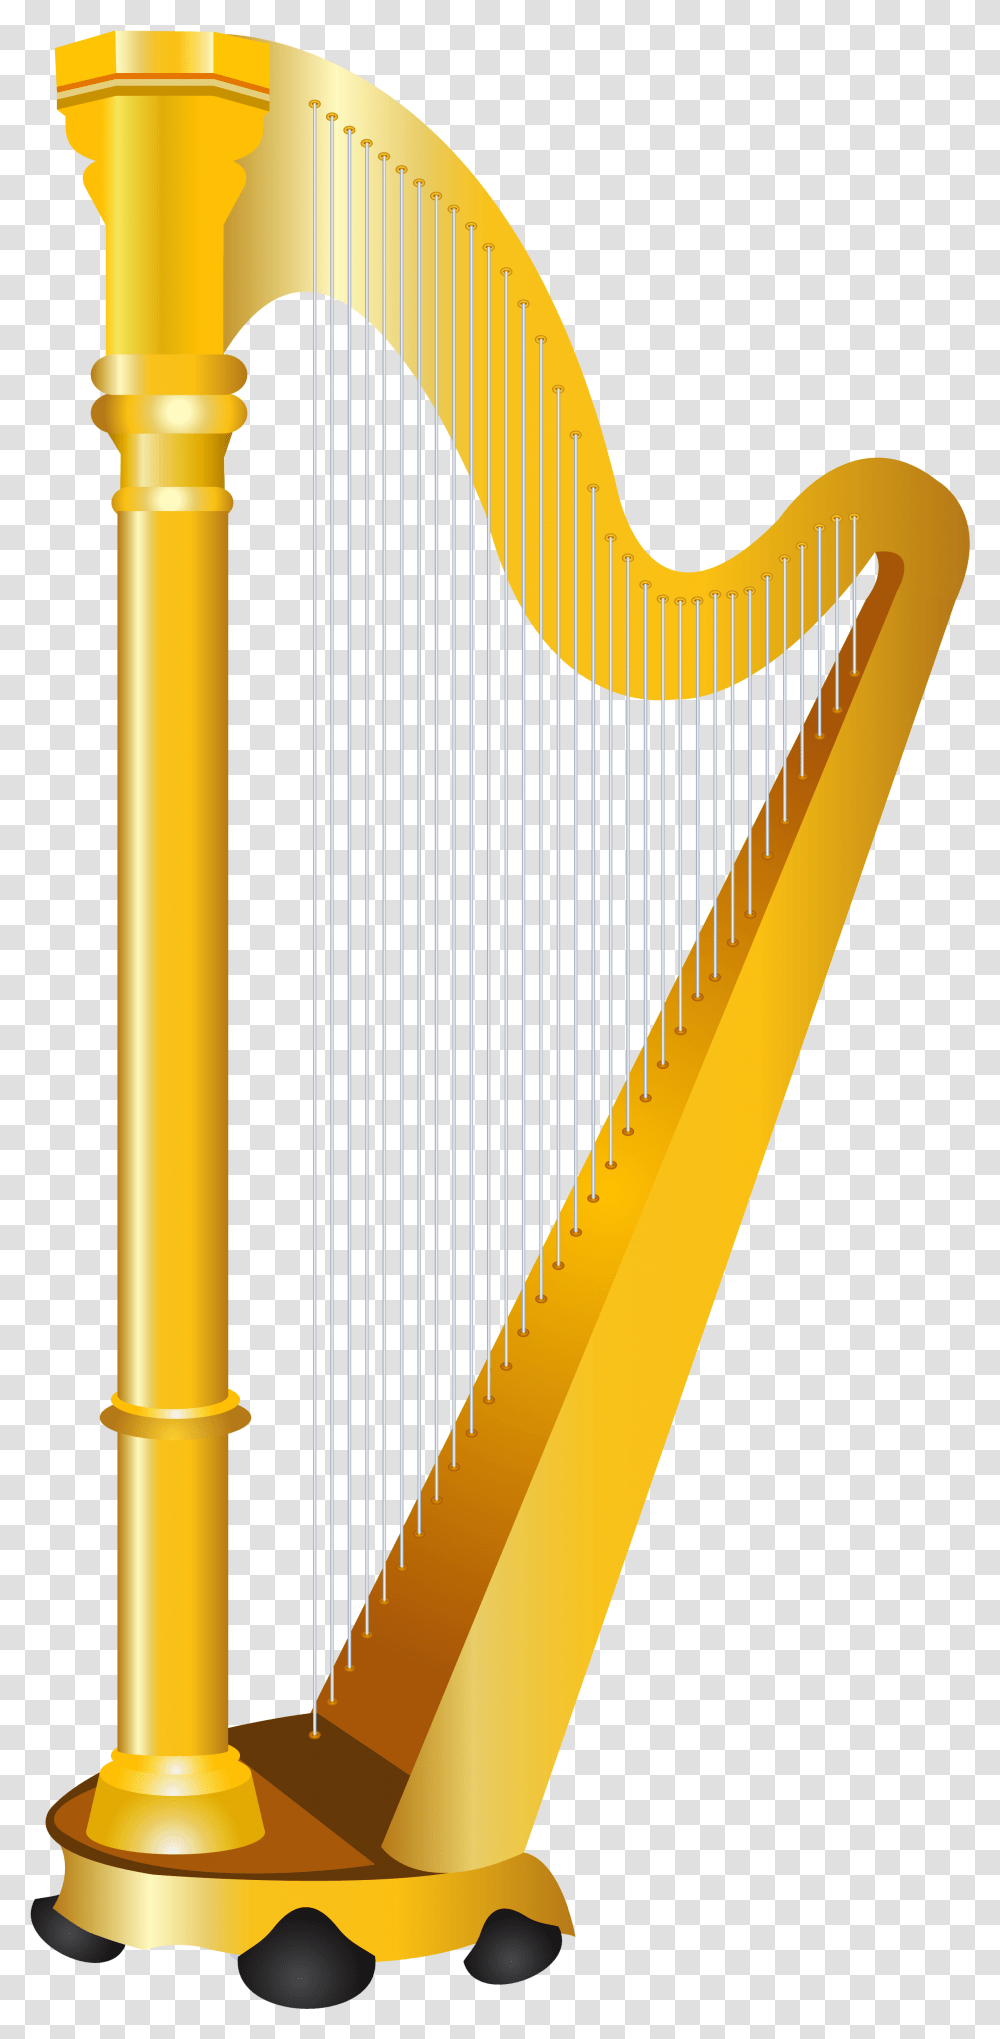 Harp Cliparts Jack And The Beanstalk Golden Harp Clipart, Musical Instrument Transparent Png